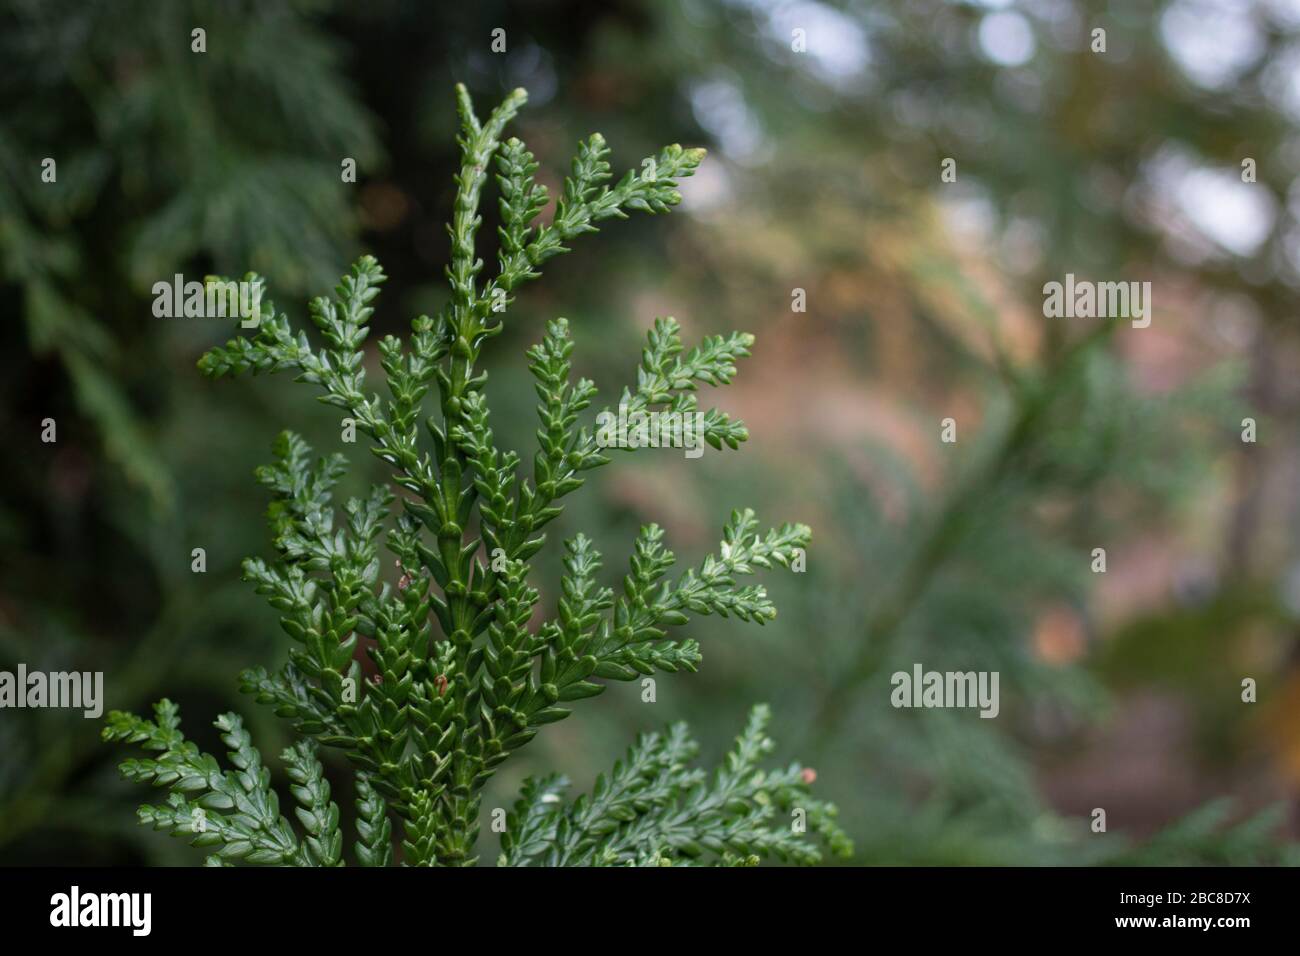 The leaves of the tree with the Latin name thujopsis closet. Close-up. Stock Photo